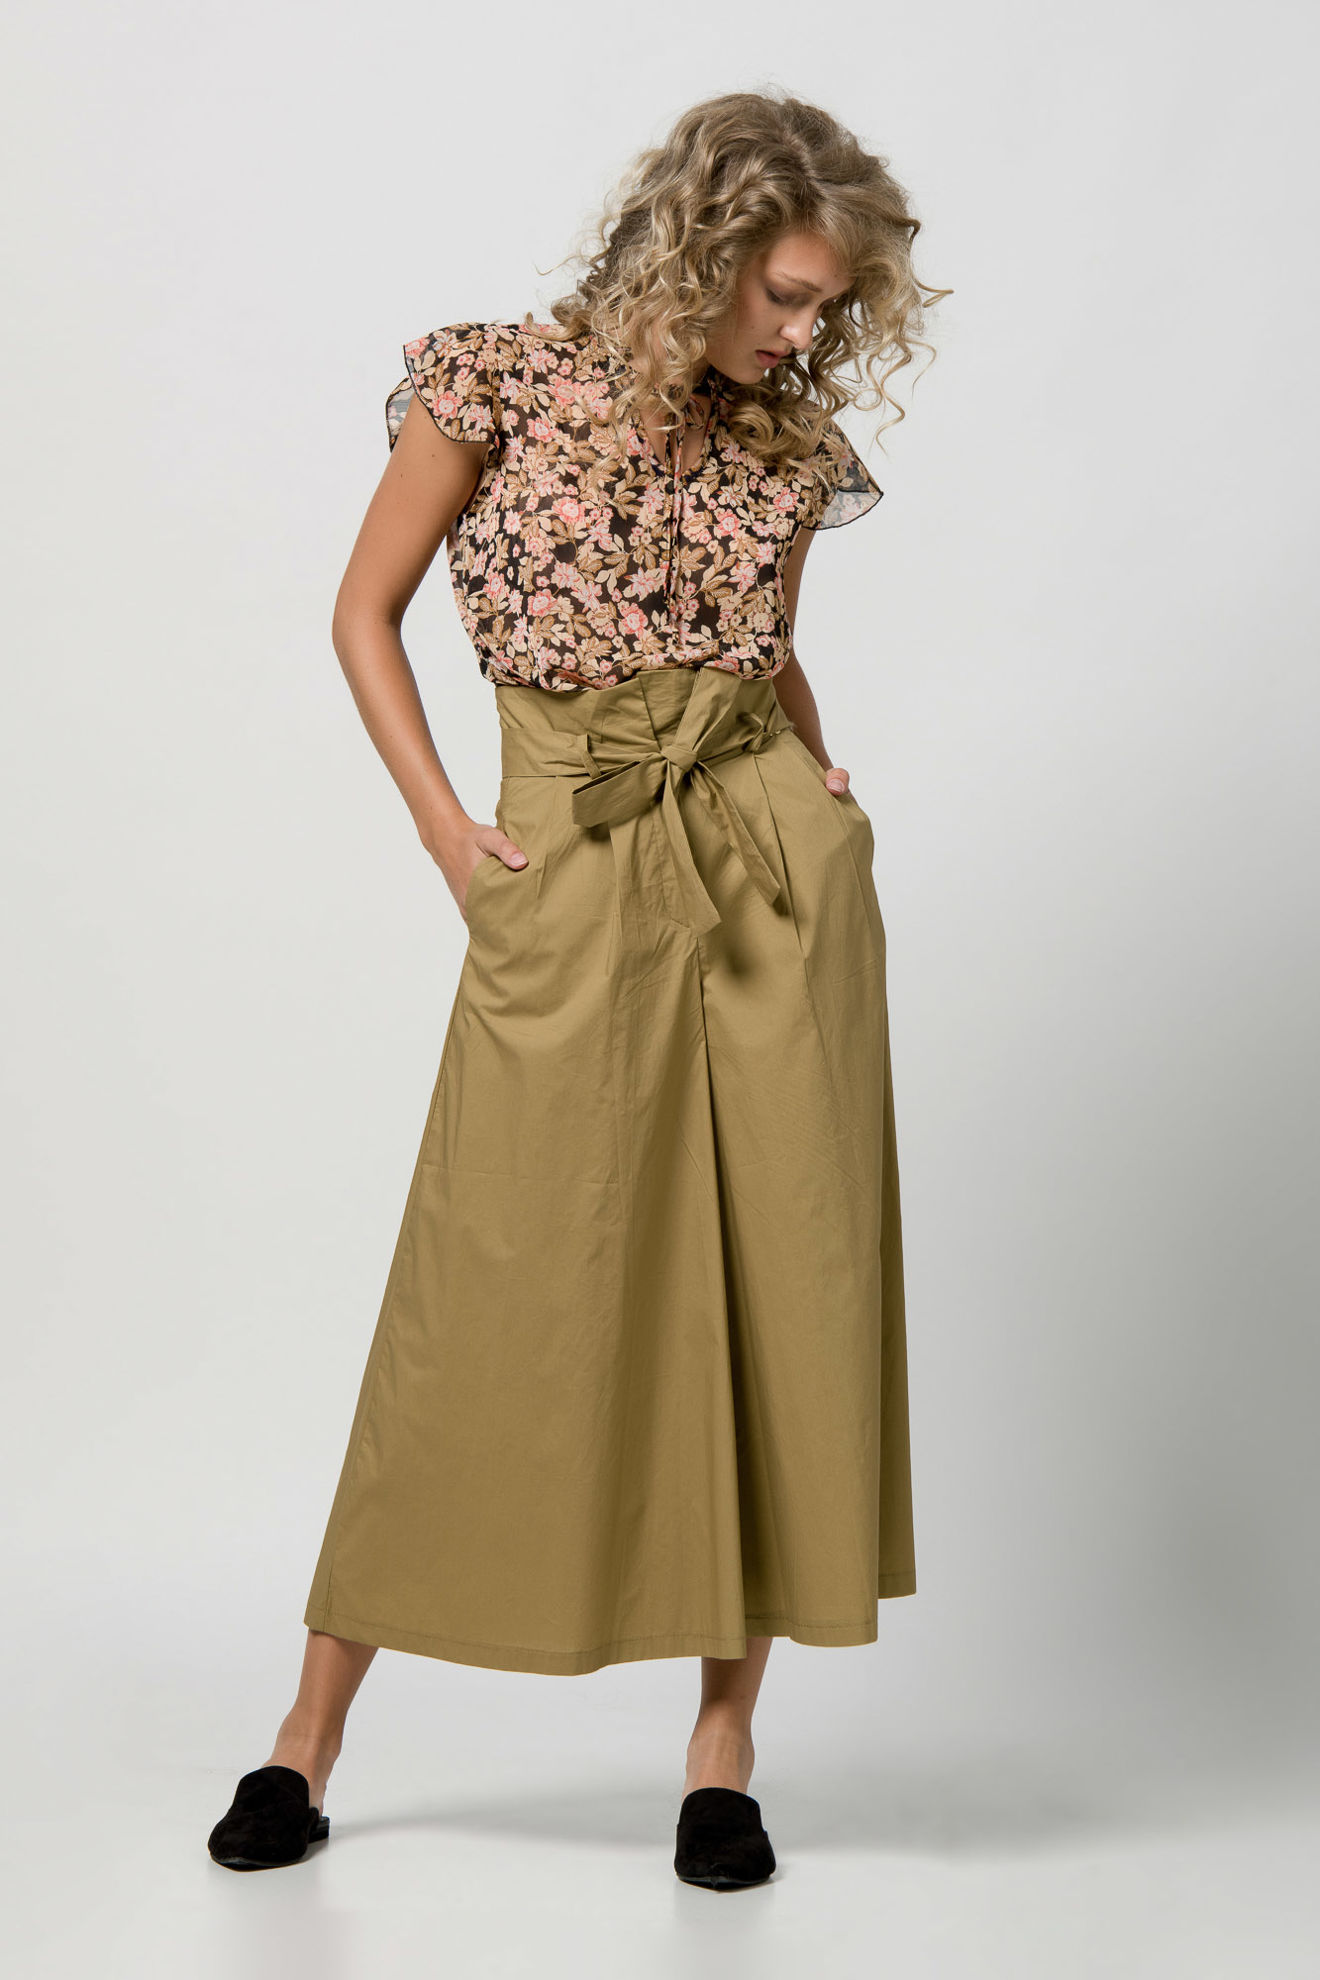 Picture of Chiffon top flower print gold details